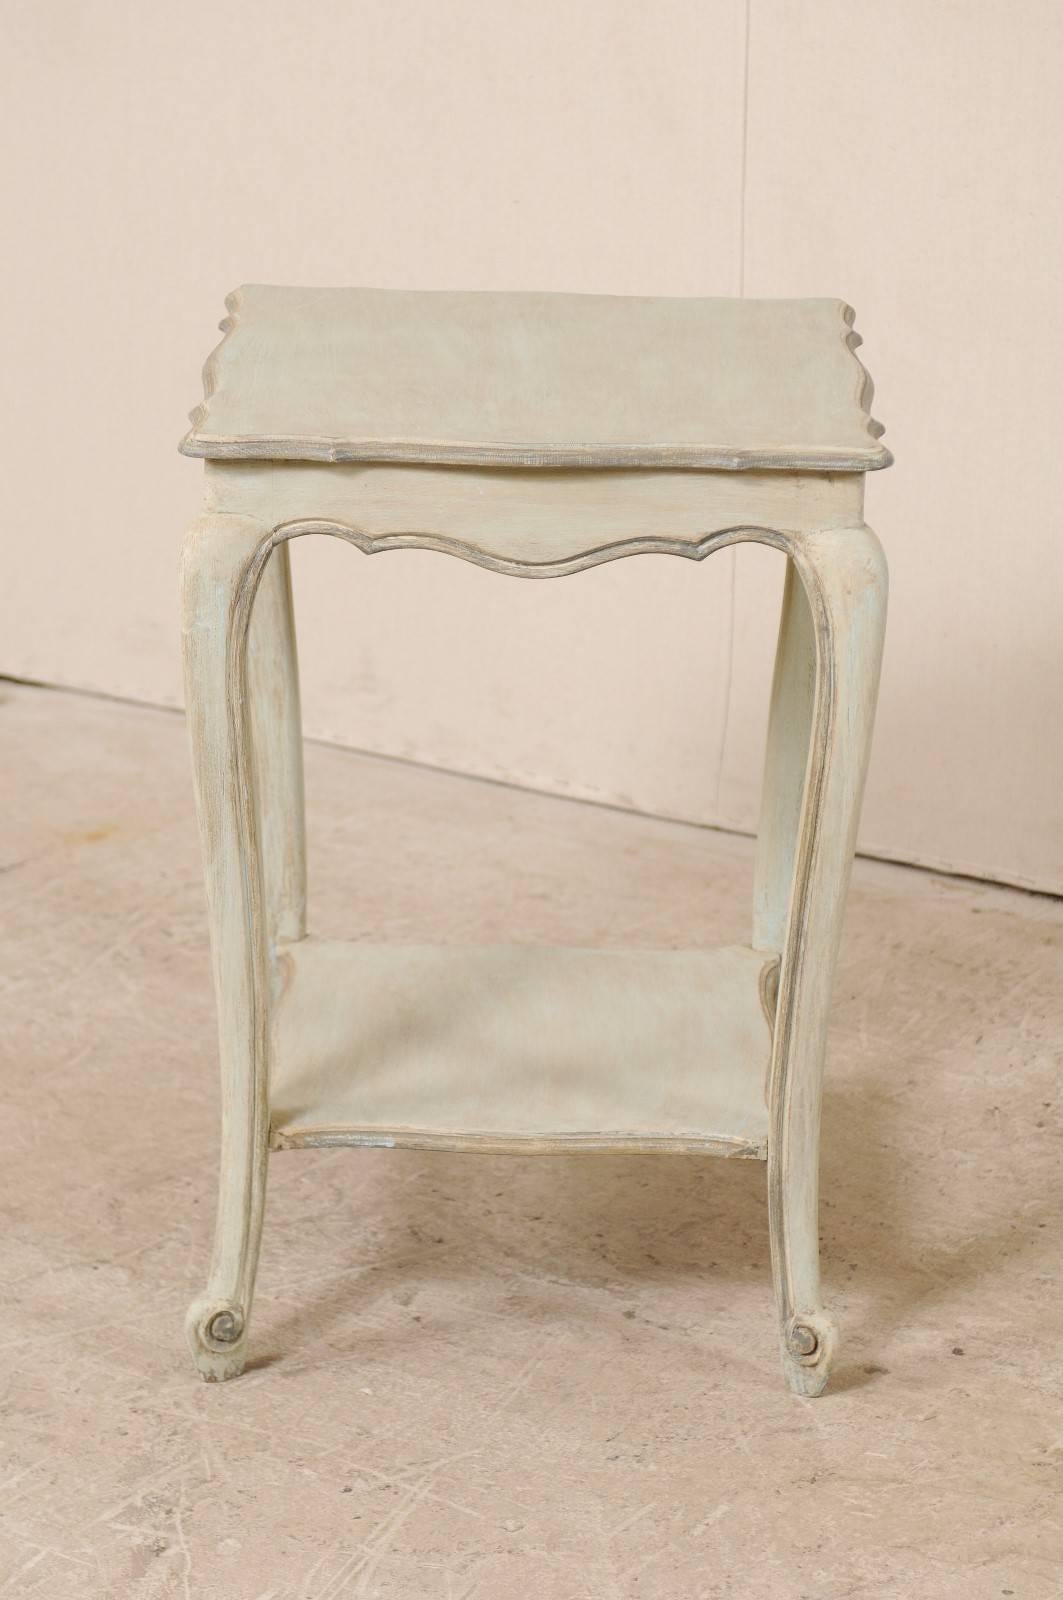 Vintage French Early 20th Century Painted Wood Side Table in Soft Pale Blue-Grey 1